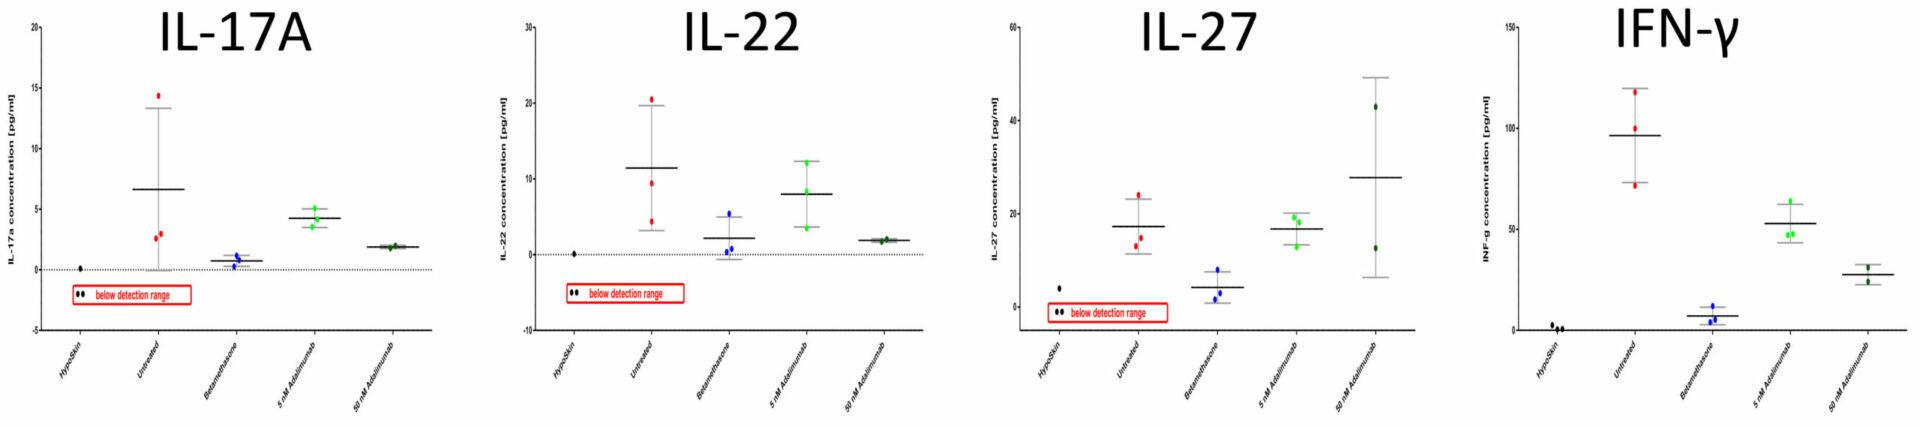 A series of 4 graphs showing the level of IL-17A, IL-22, IL-27 and INF-γ in InflammaSkin® with and without injection of adalimumab